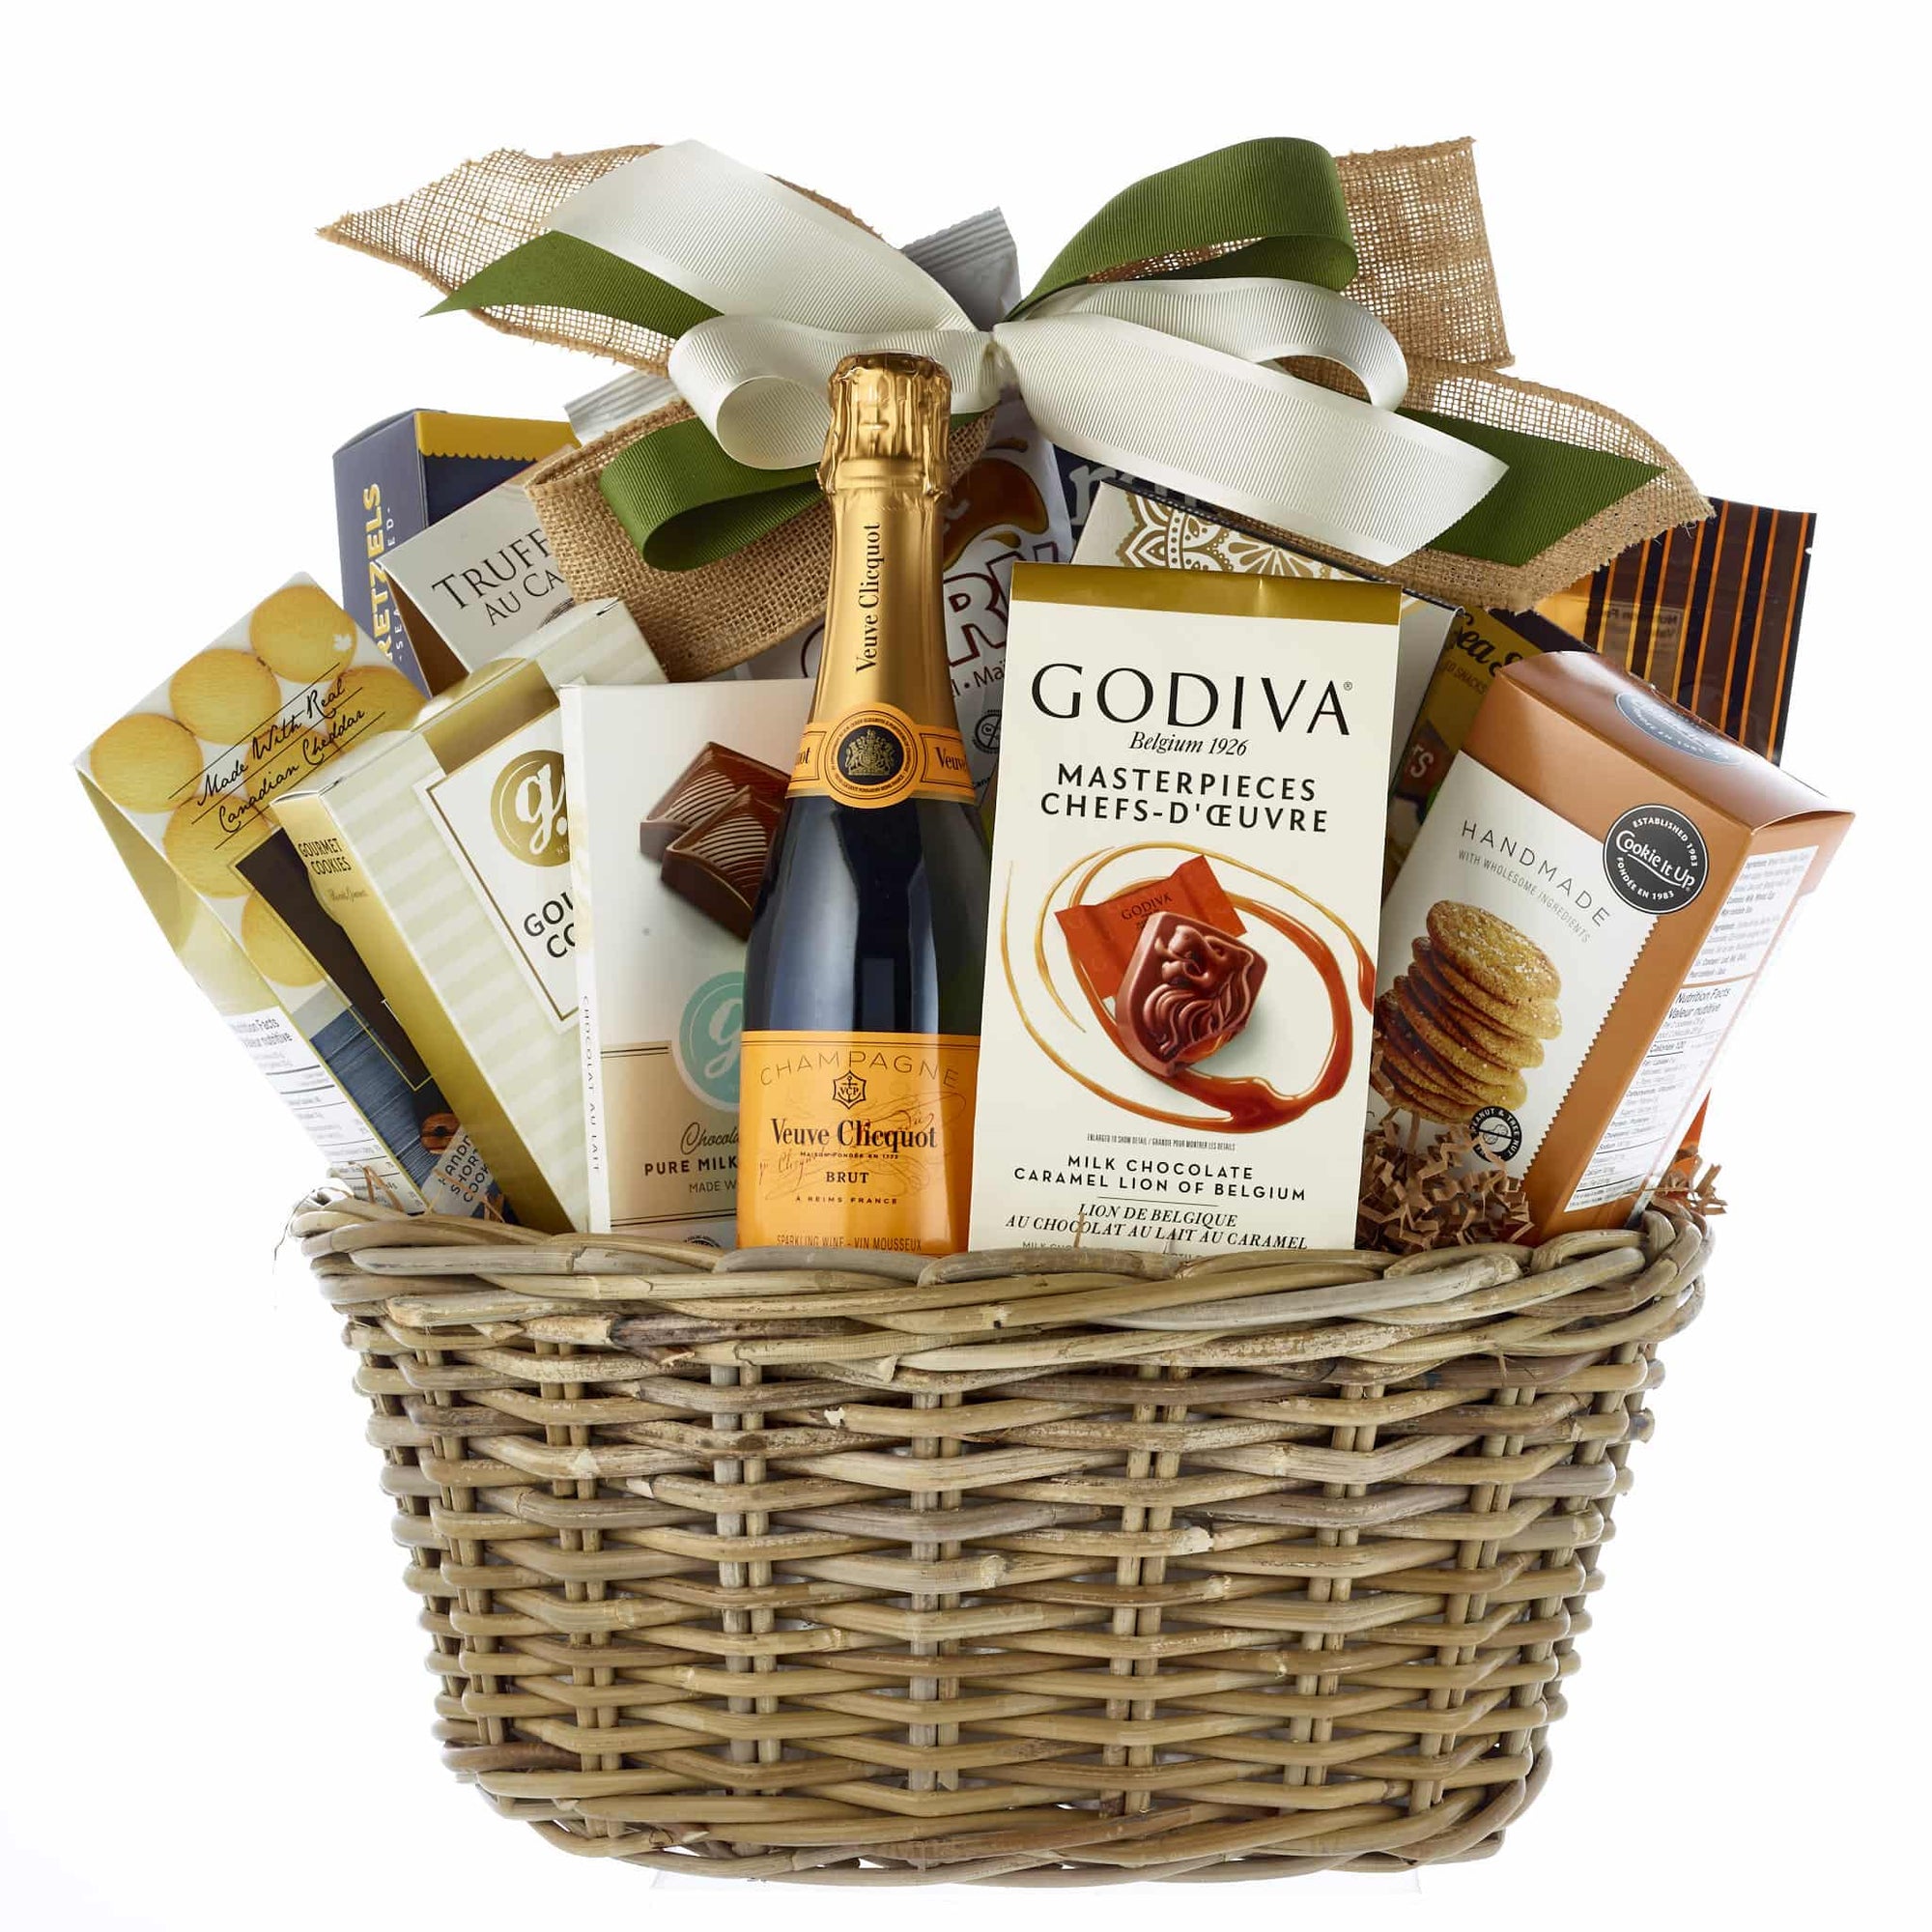 Champagne and Mimosa Gift Basket by Gourmet Gift Baskets